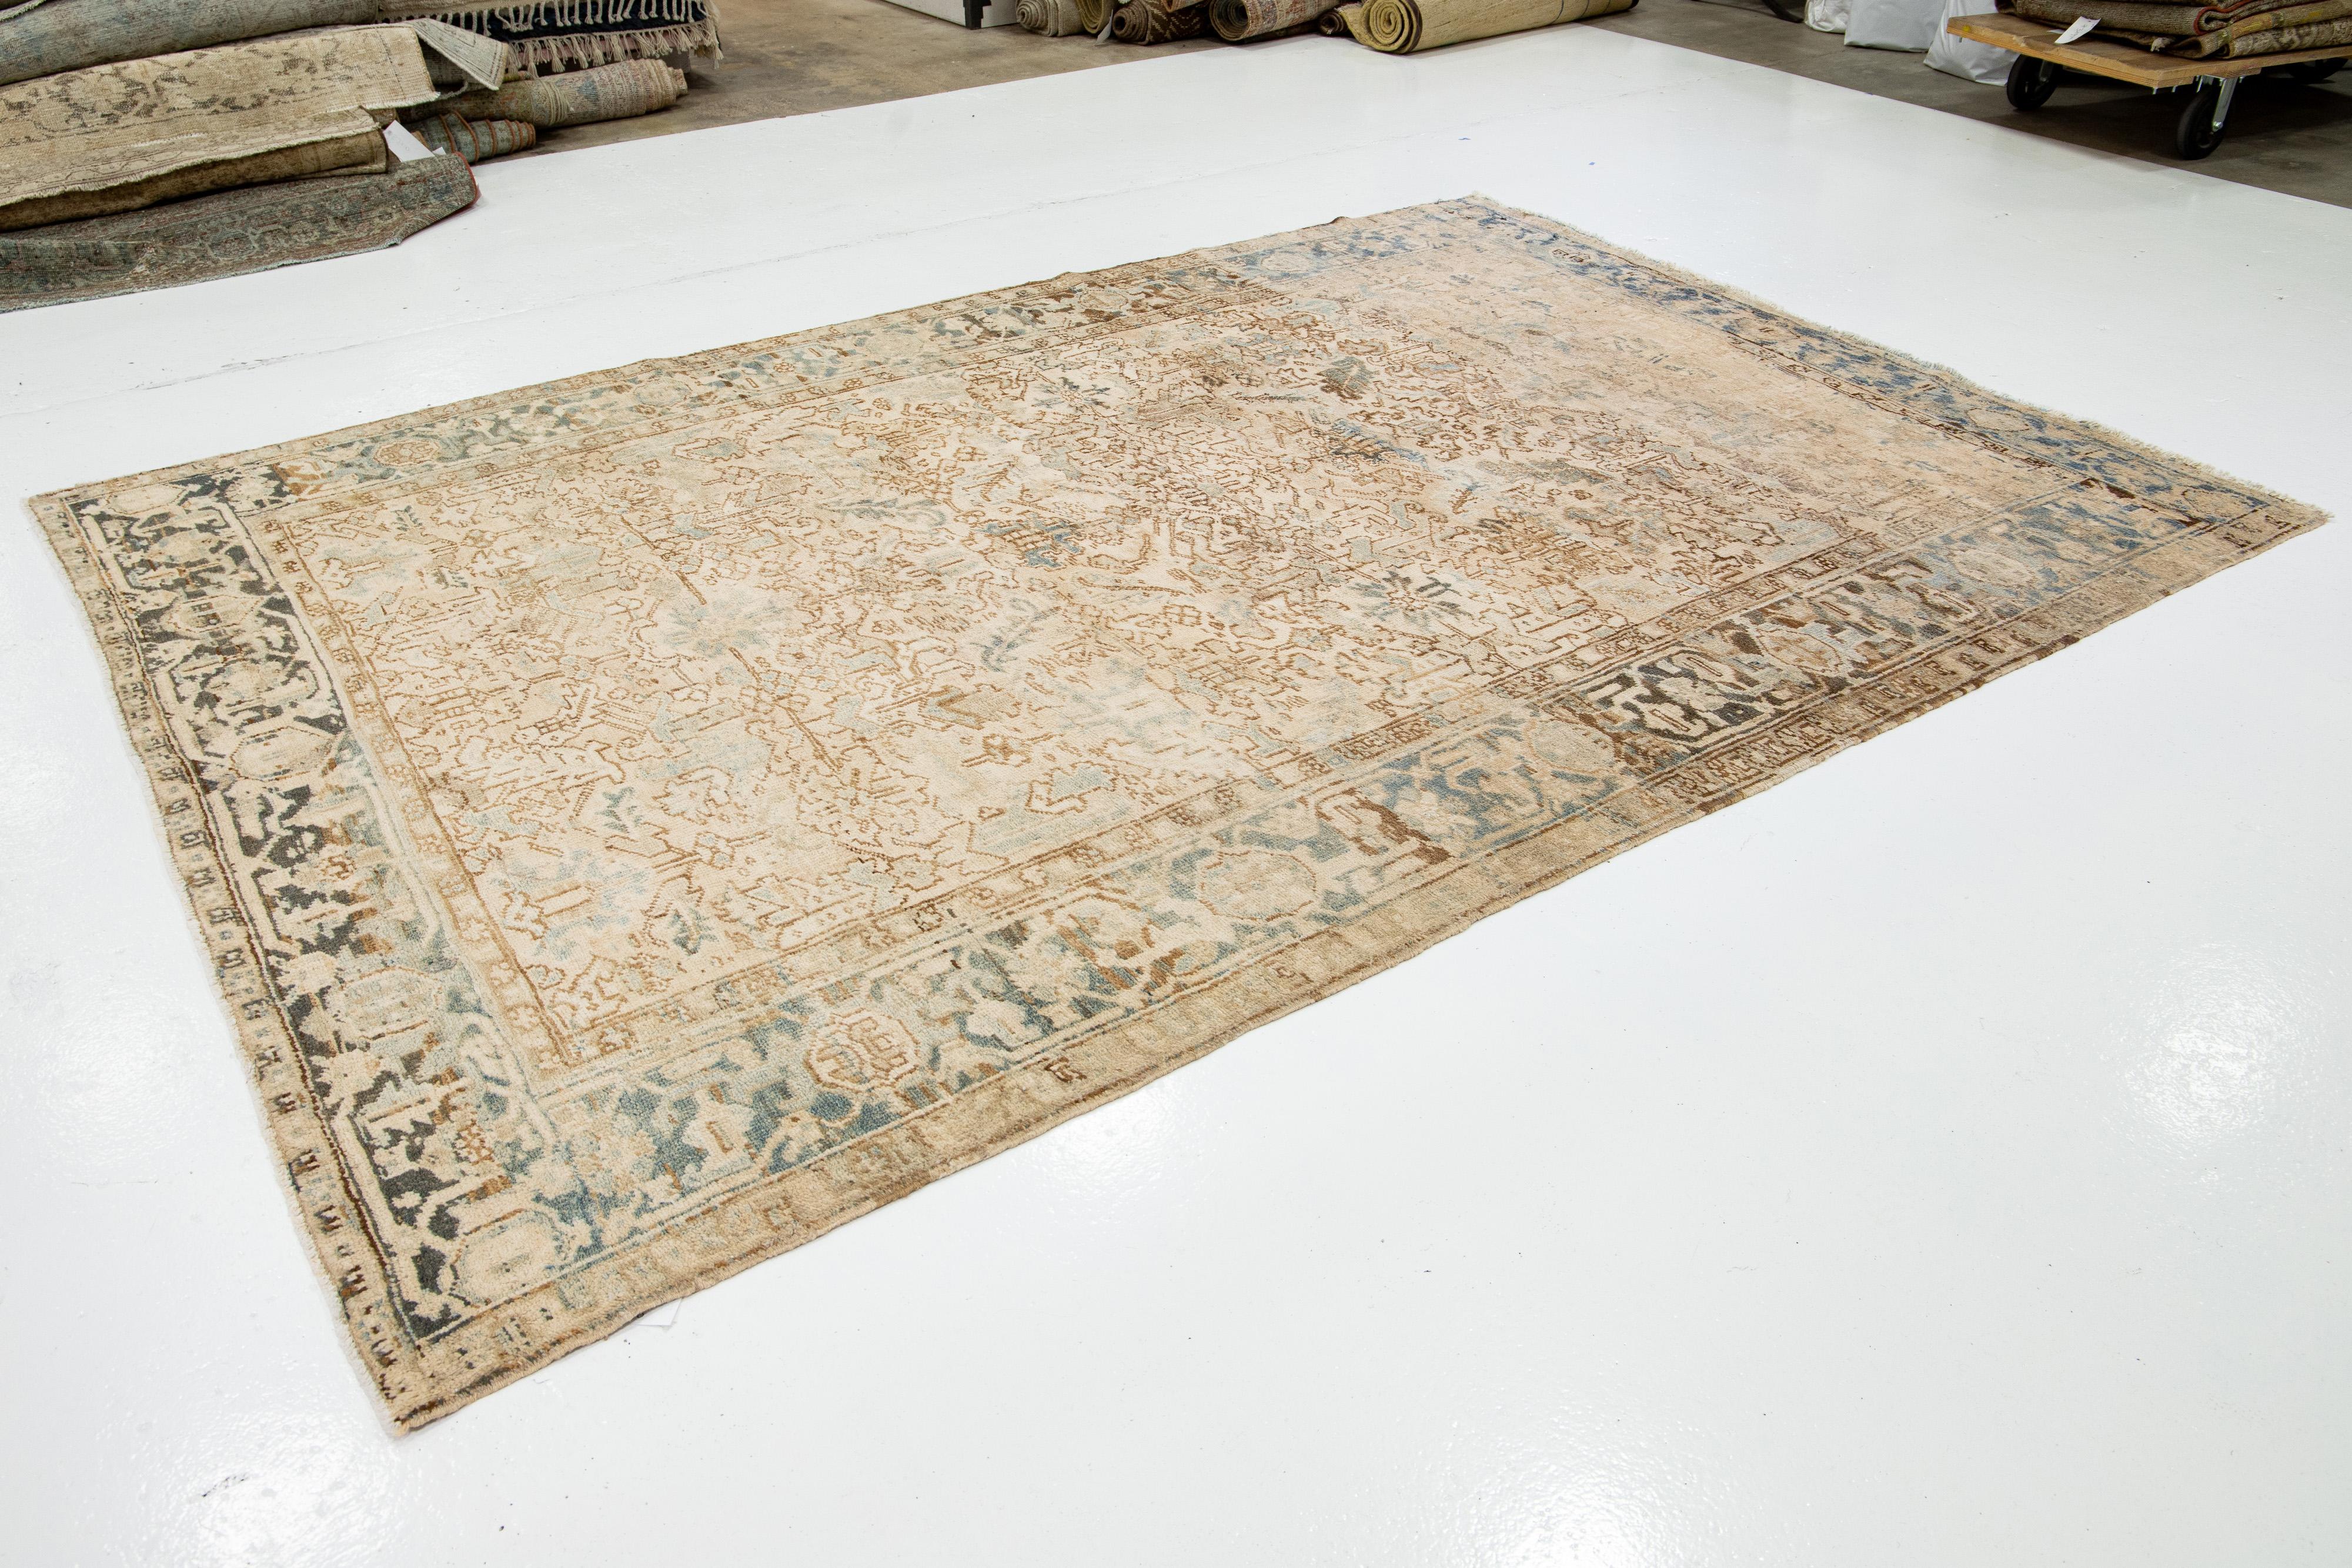  Room Size Persian Heriz Antique Wool Rug In Beige with Allover Pattern In Excellent Condition For Sale In Norwalk, CT